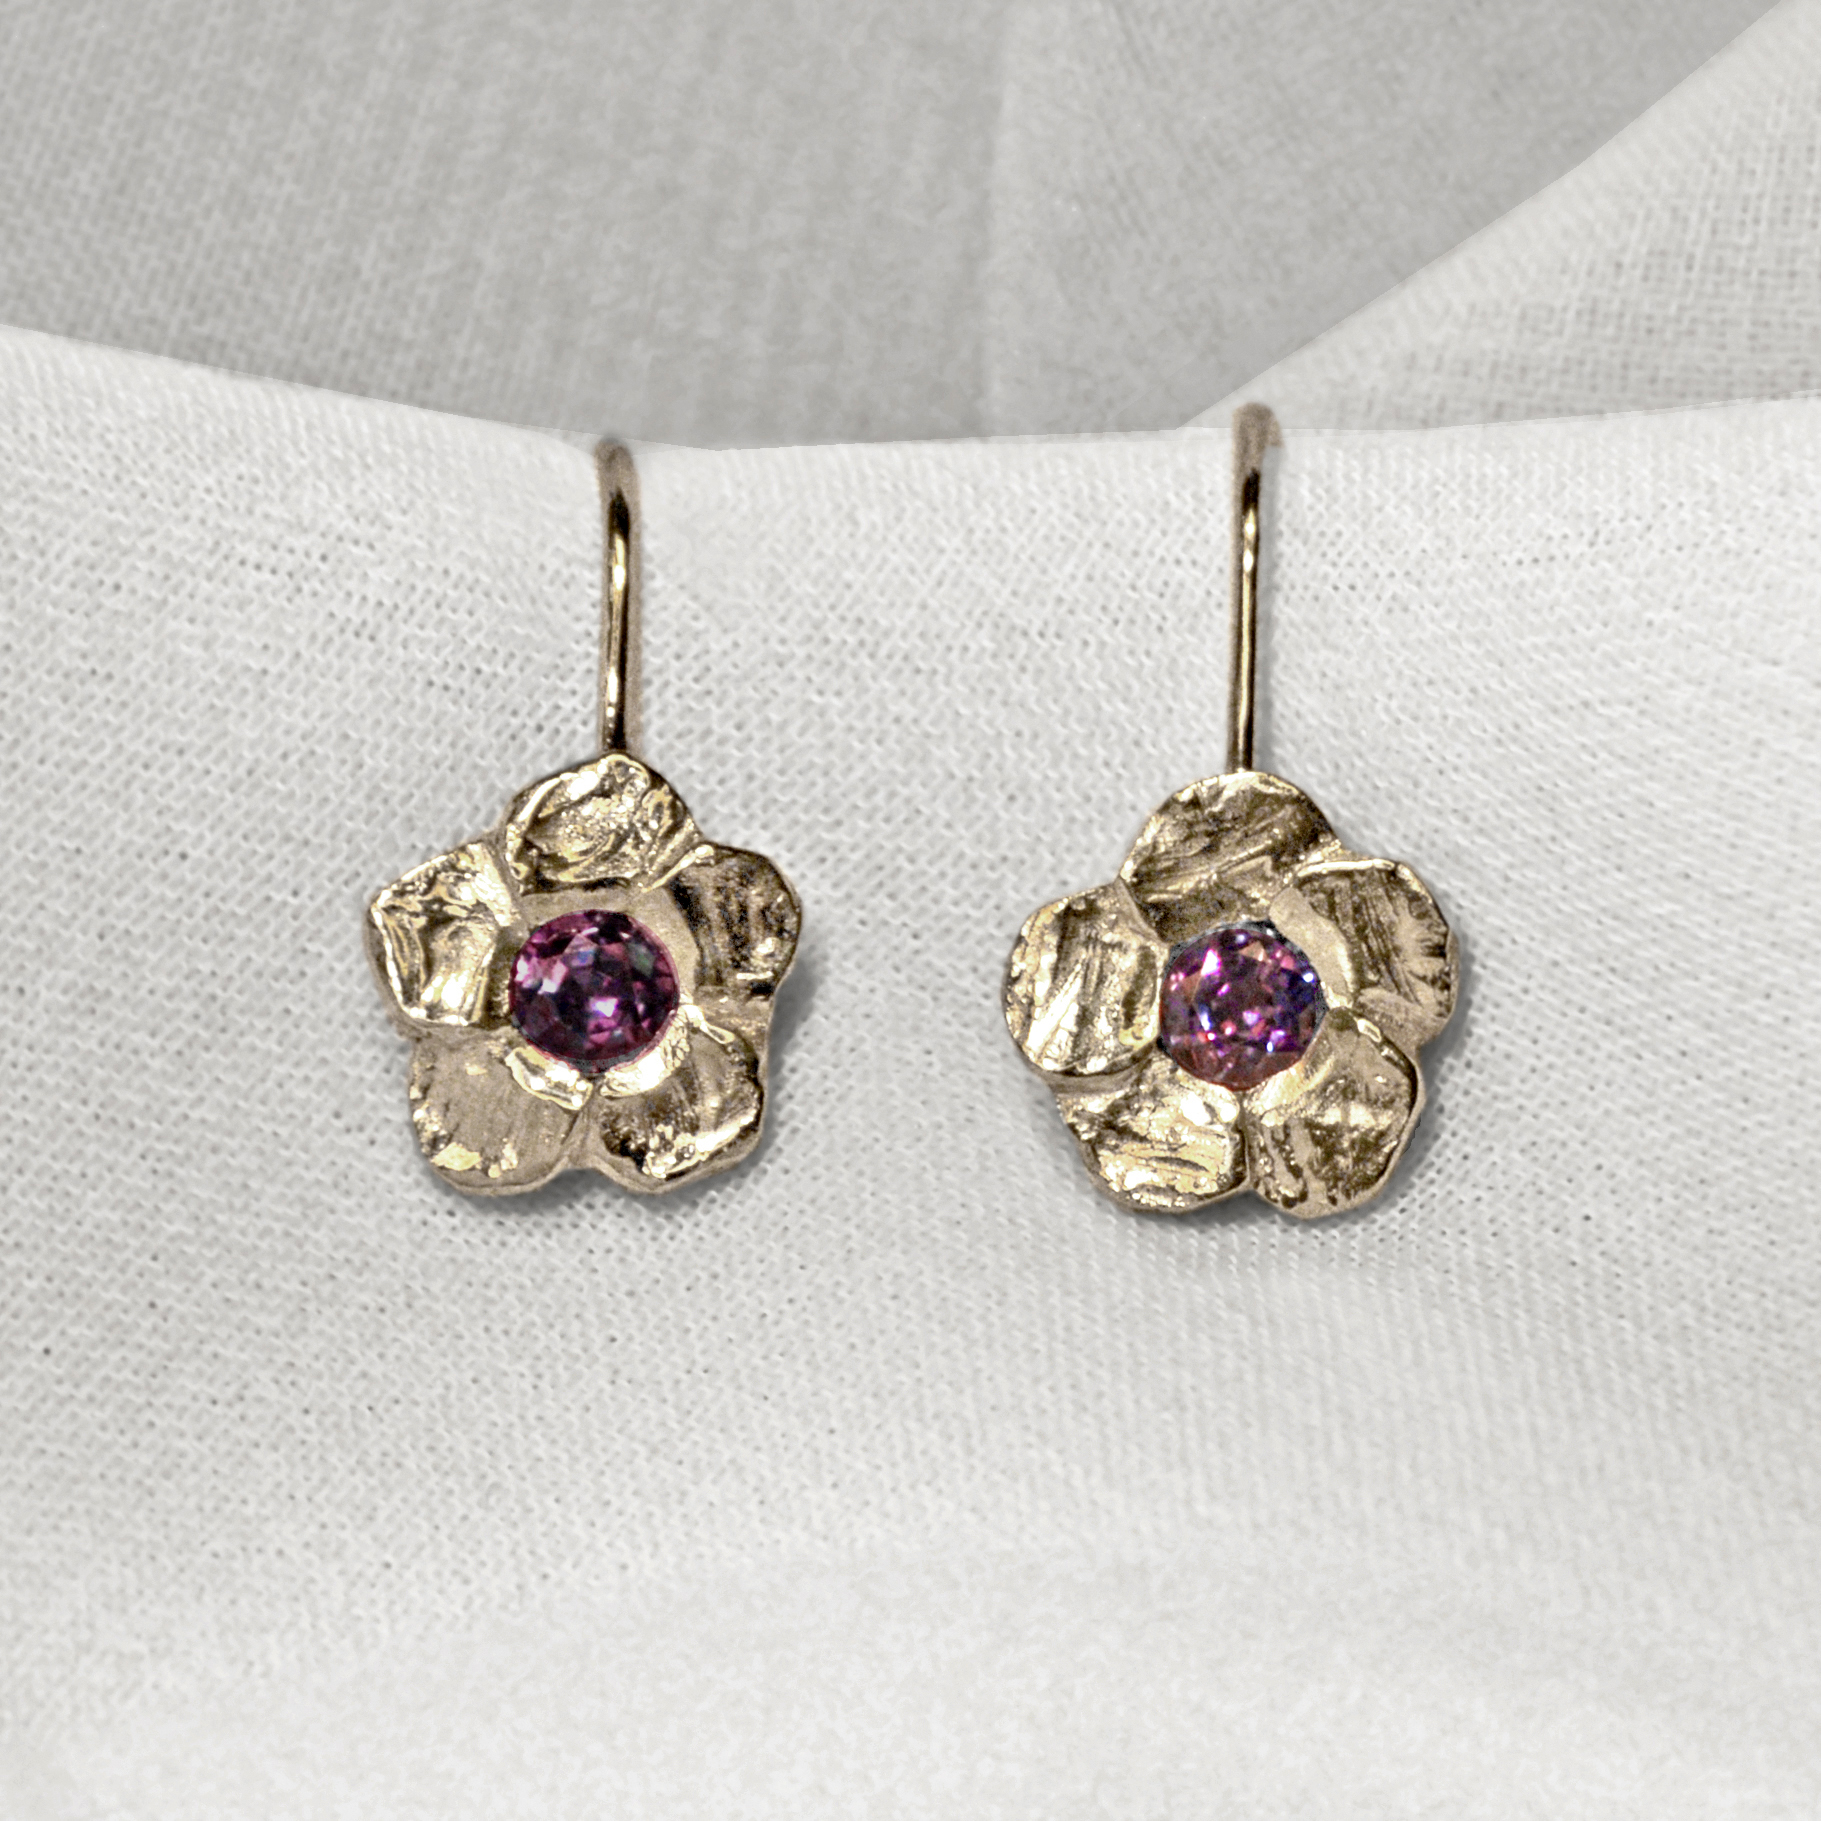 Pair of natural round alexandrite gemstones color change from plum to teal in flower petal earrings 14K white gold, designed by Morgan's Treasure